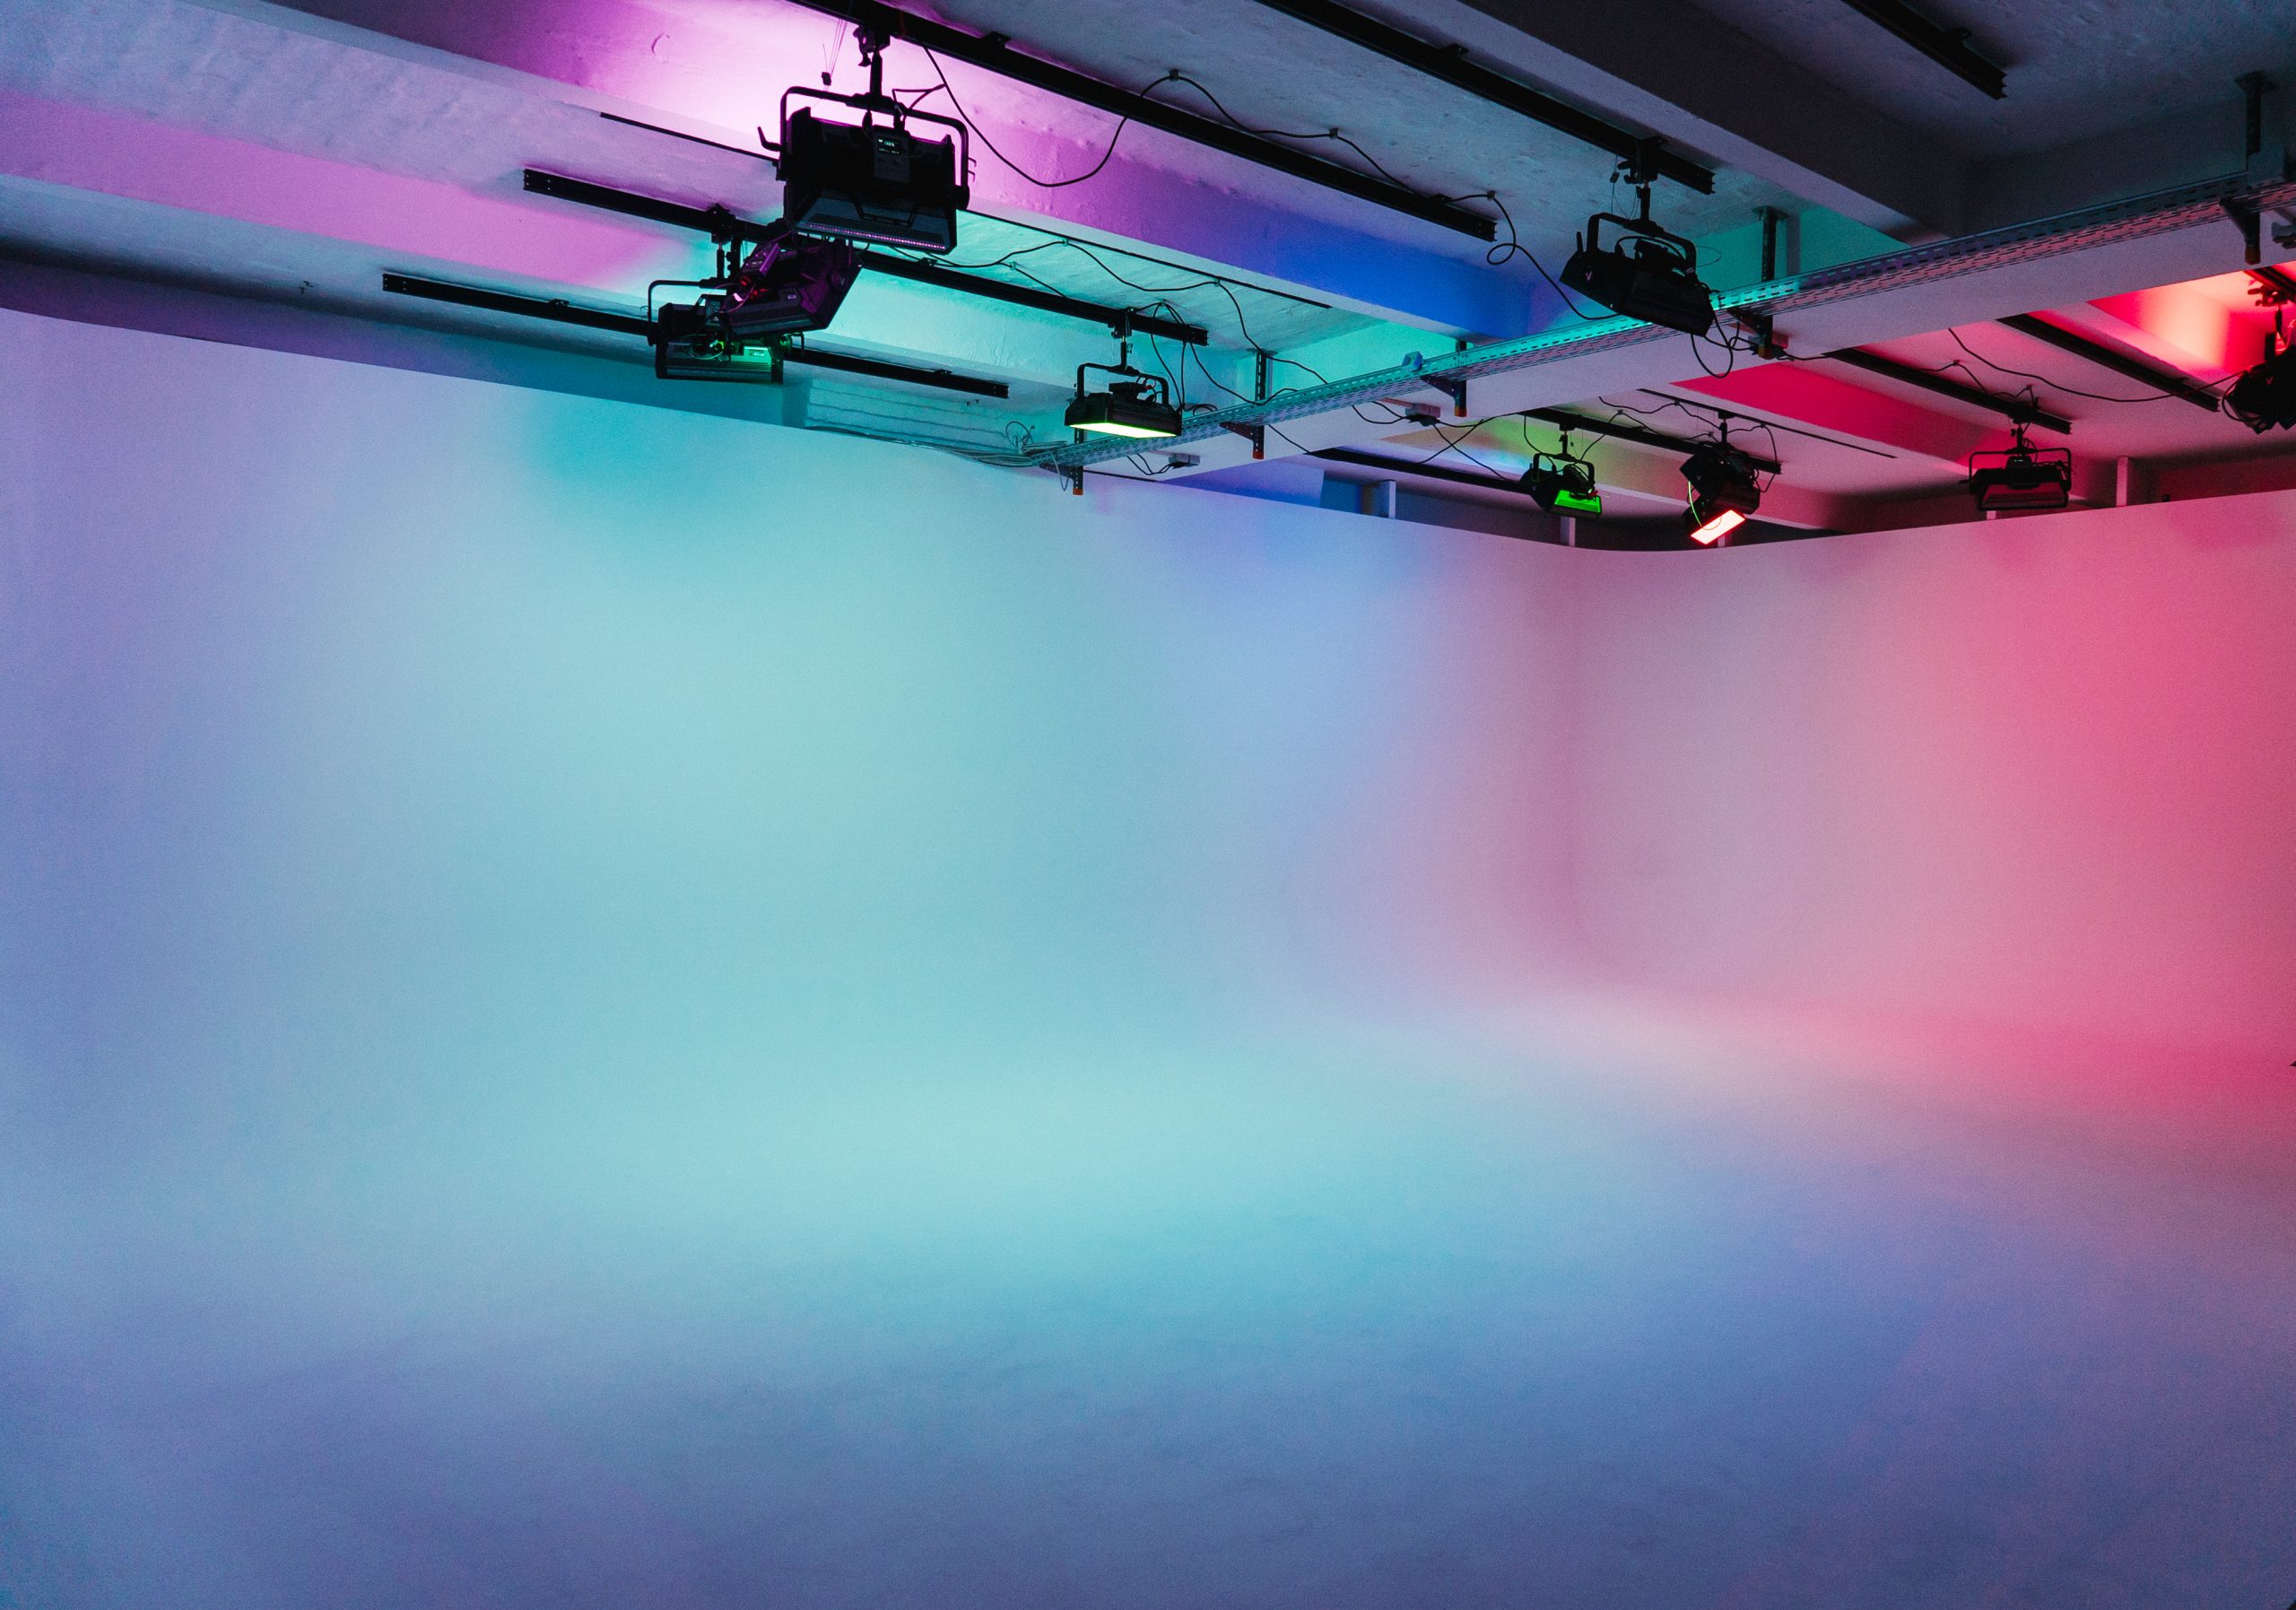 The cyclorama has been colourfully illuminated with the help of Apurture Nova 300 lights